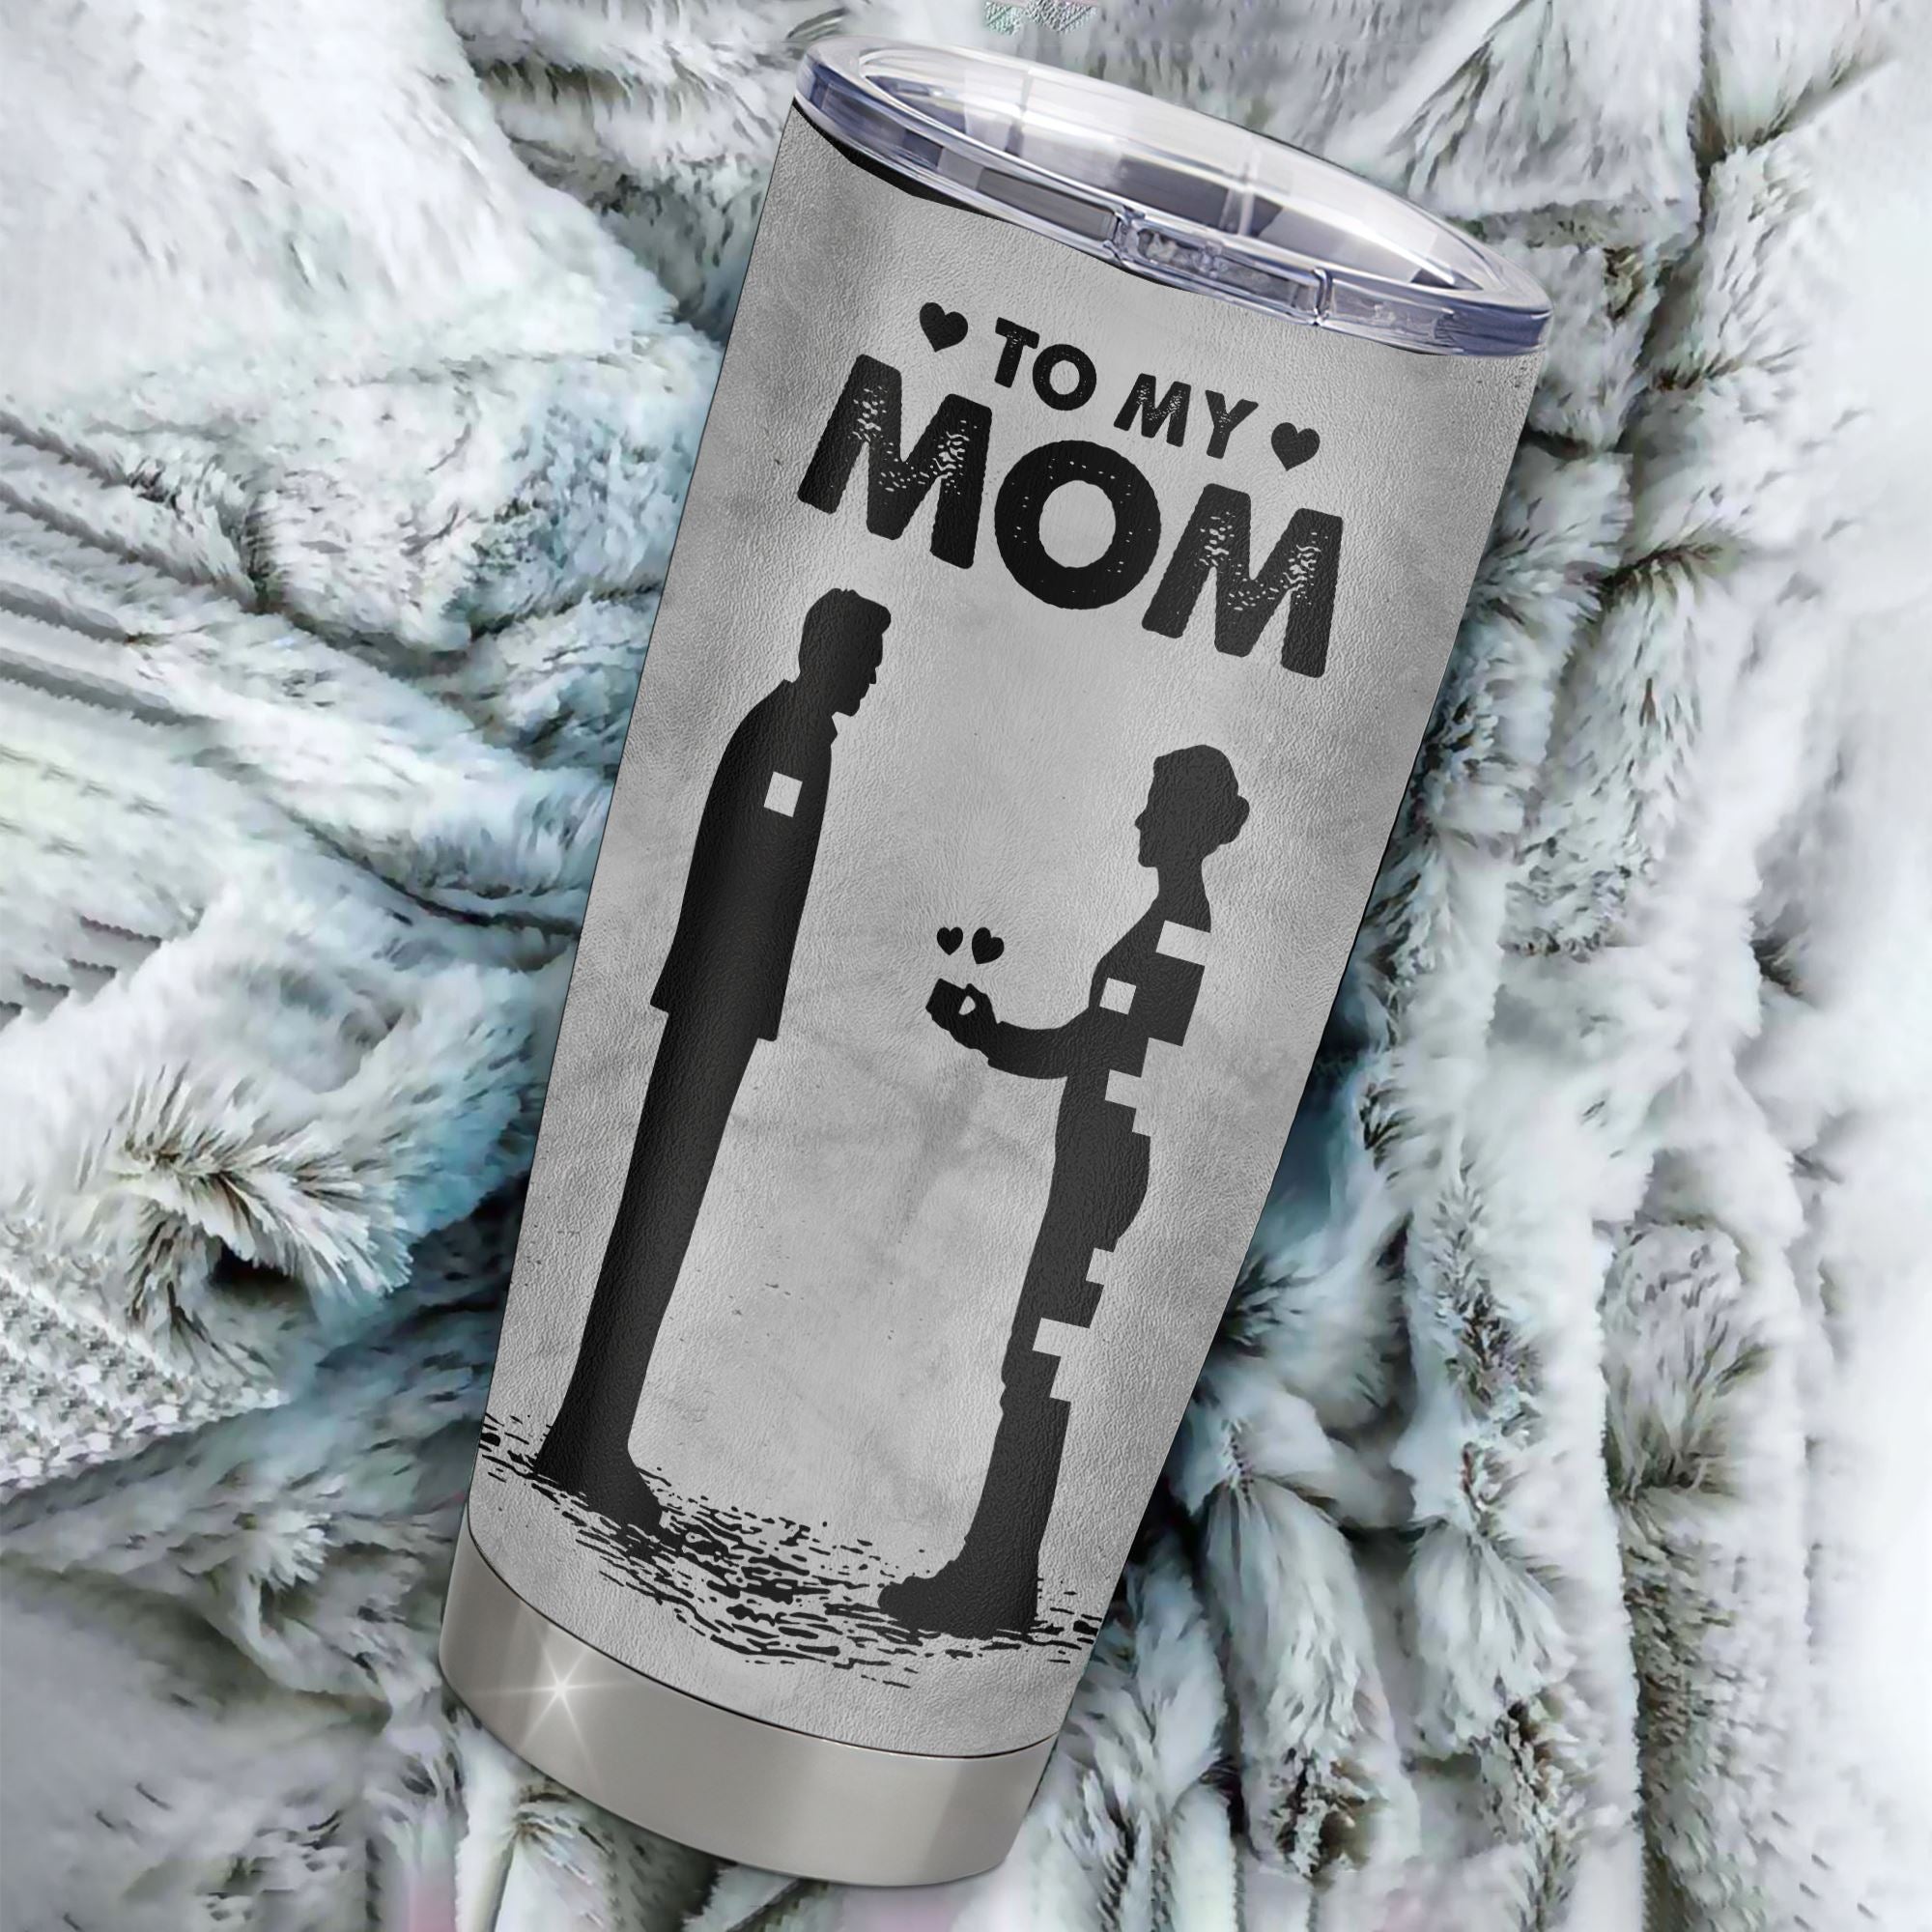 Mom's Birthday Gift from Daughter Son Stepson Personalized Thermos